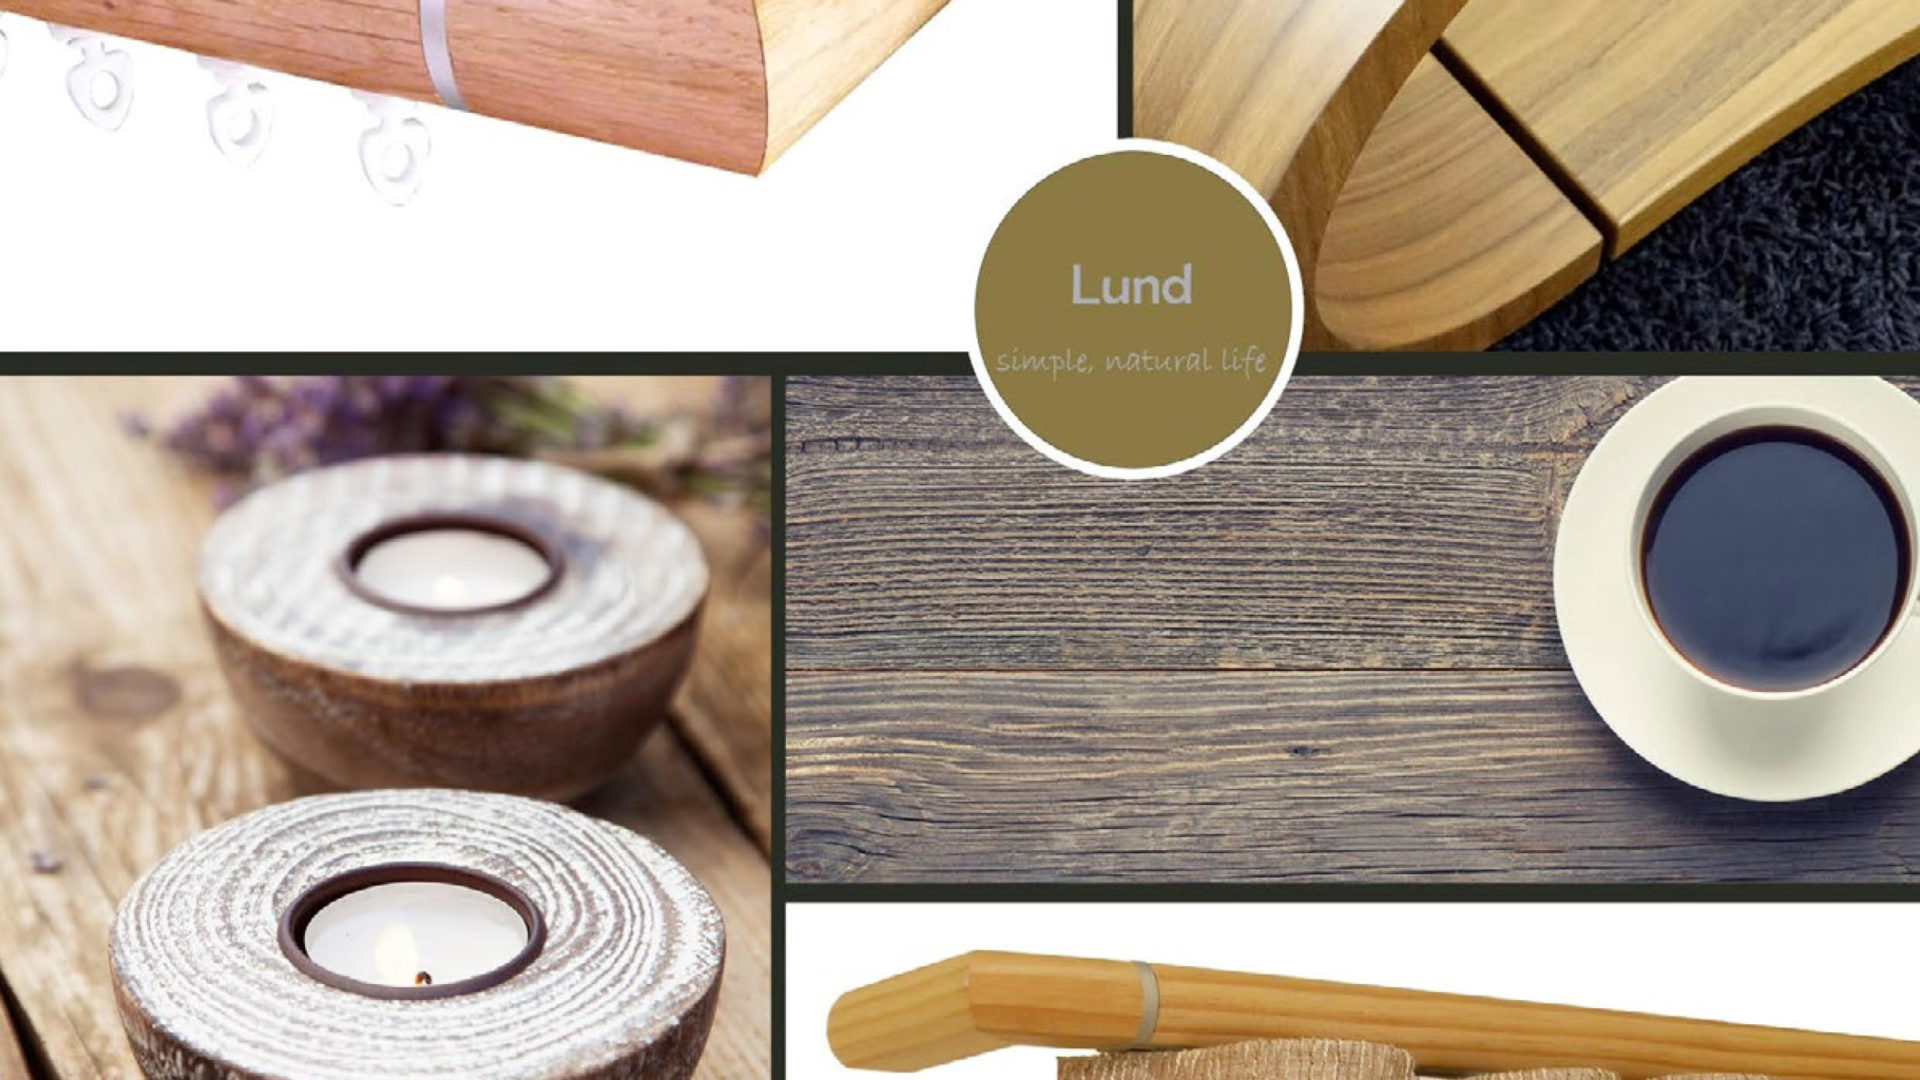 The ultimate natural look – Lund m52 features carefully selected oak for the highest quality finish